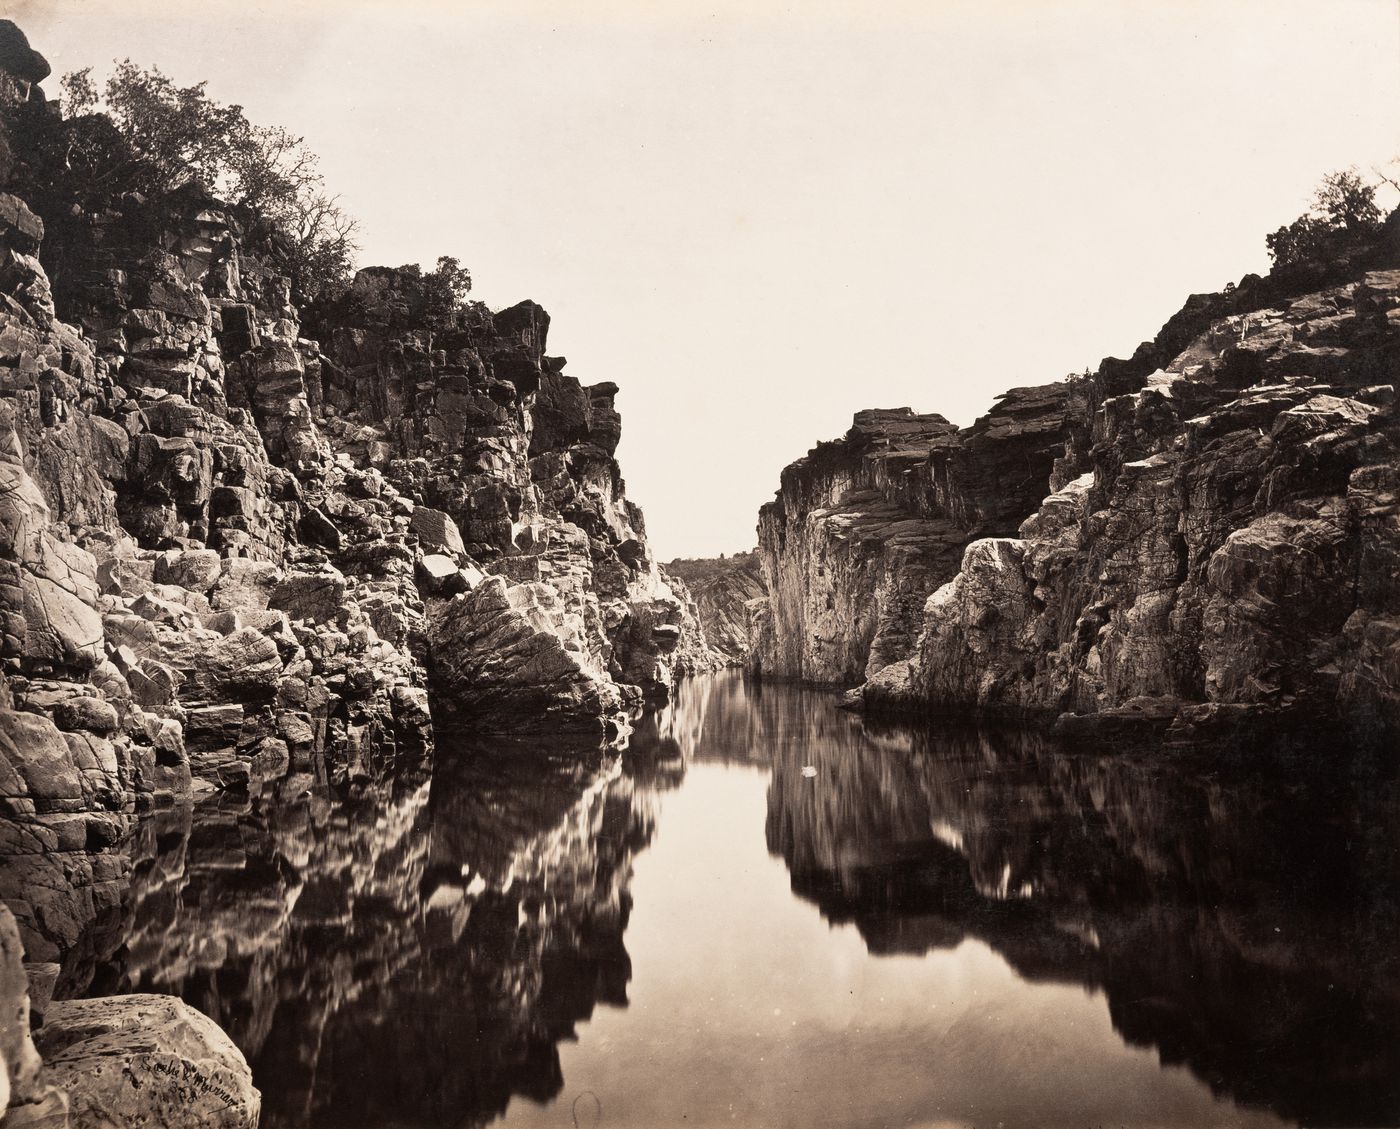 View of the Marble Rocks and the Monkey's Leap, Jabalpur, India